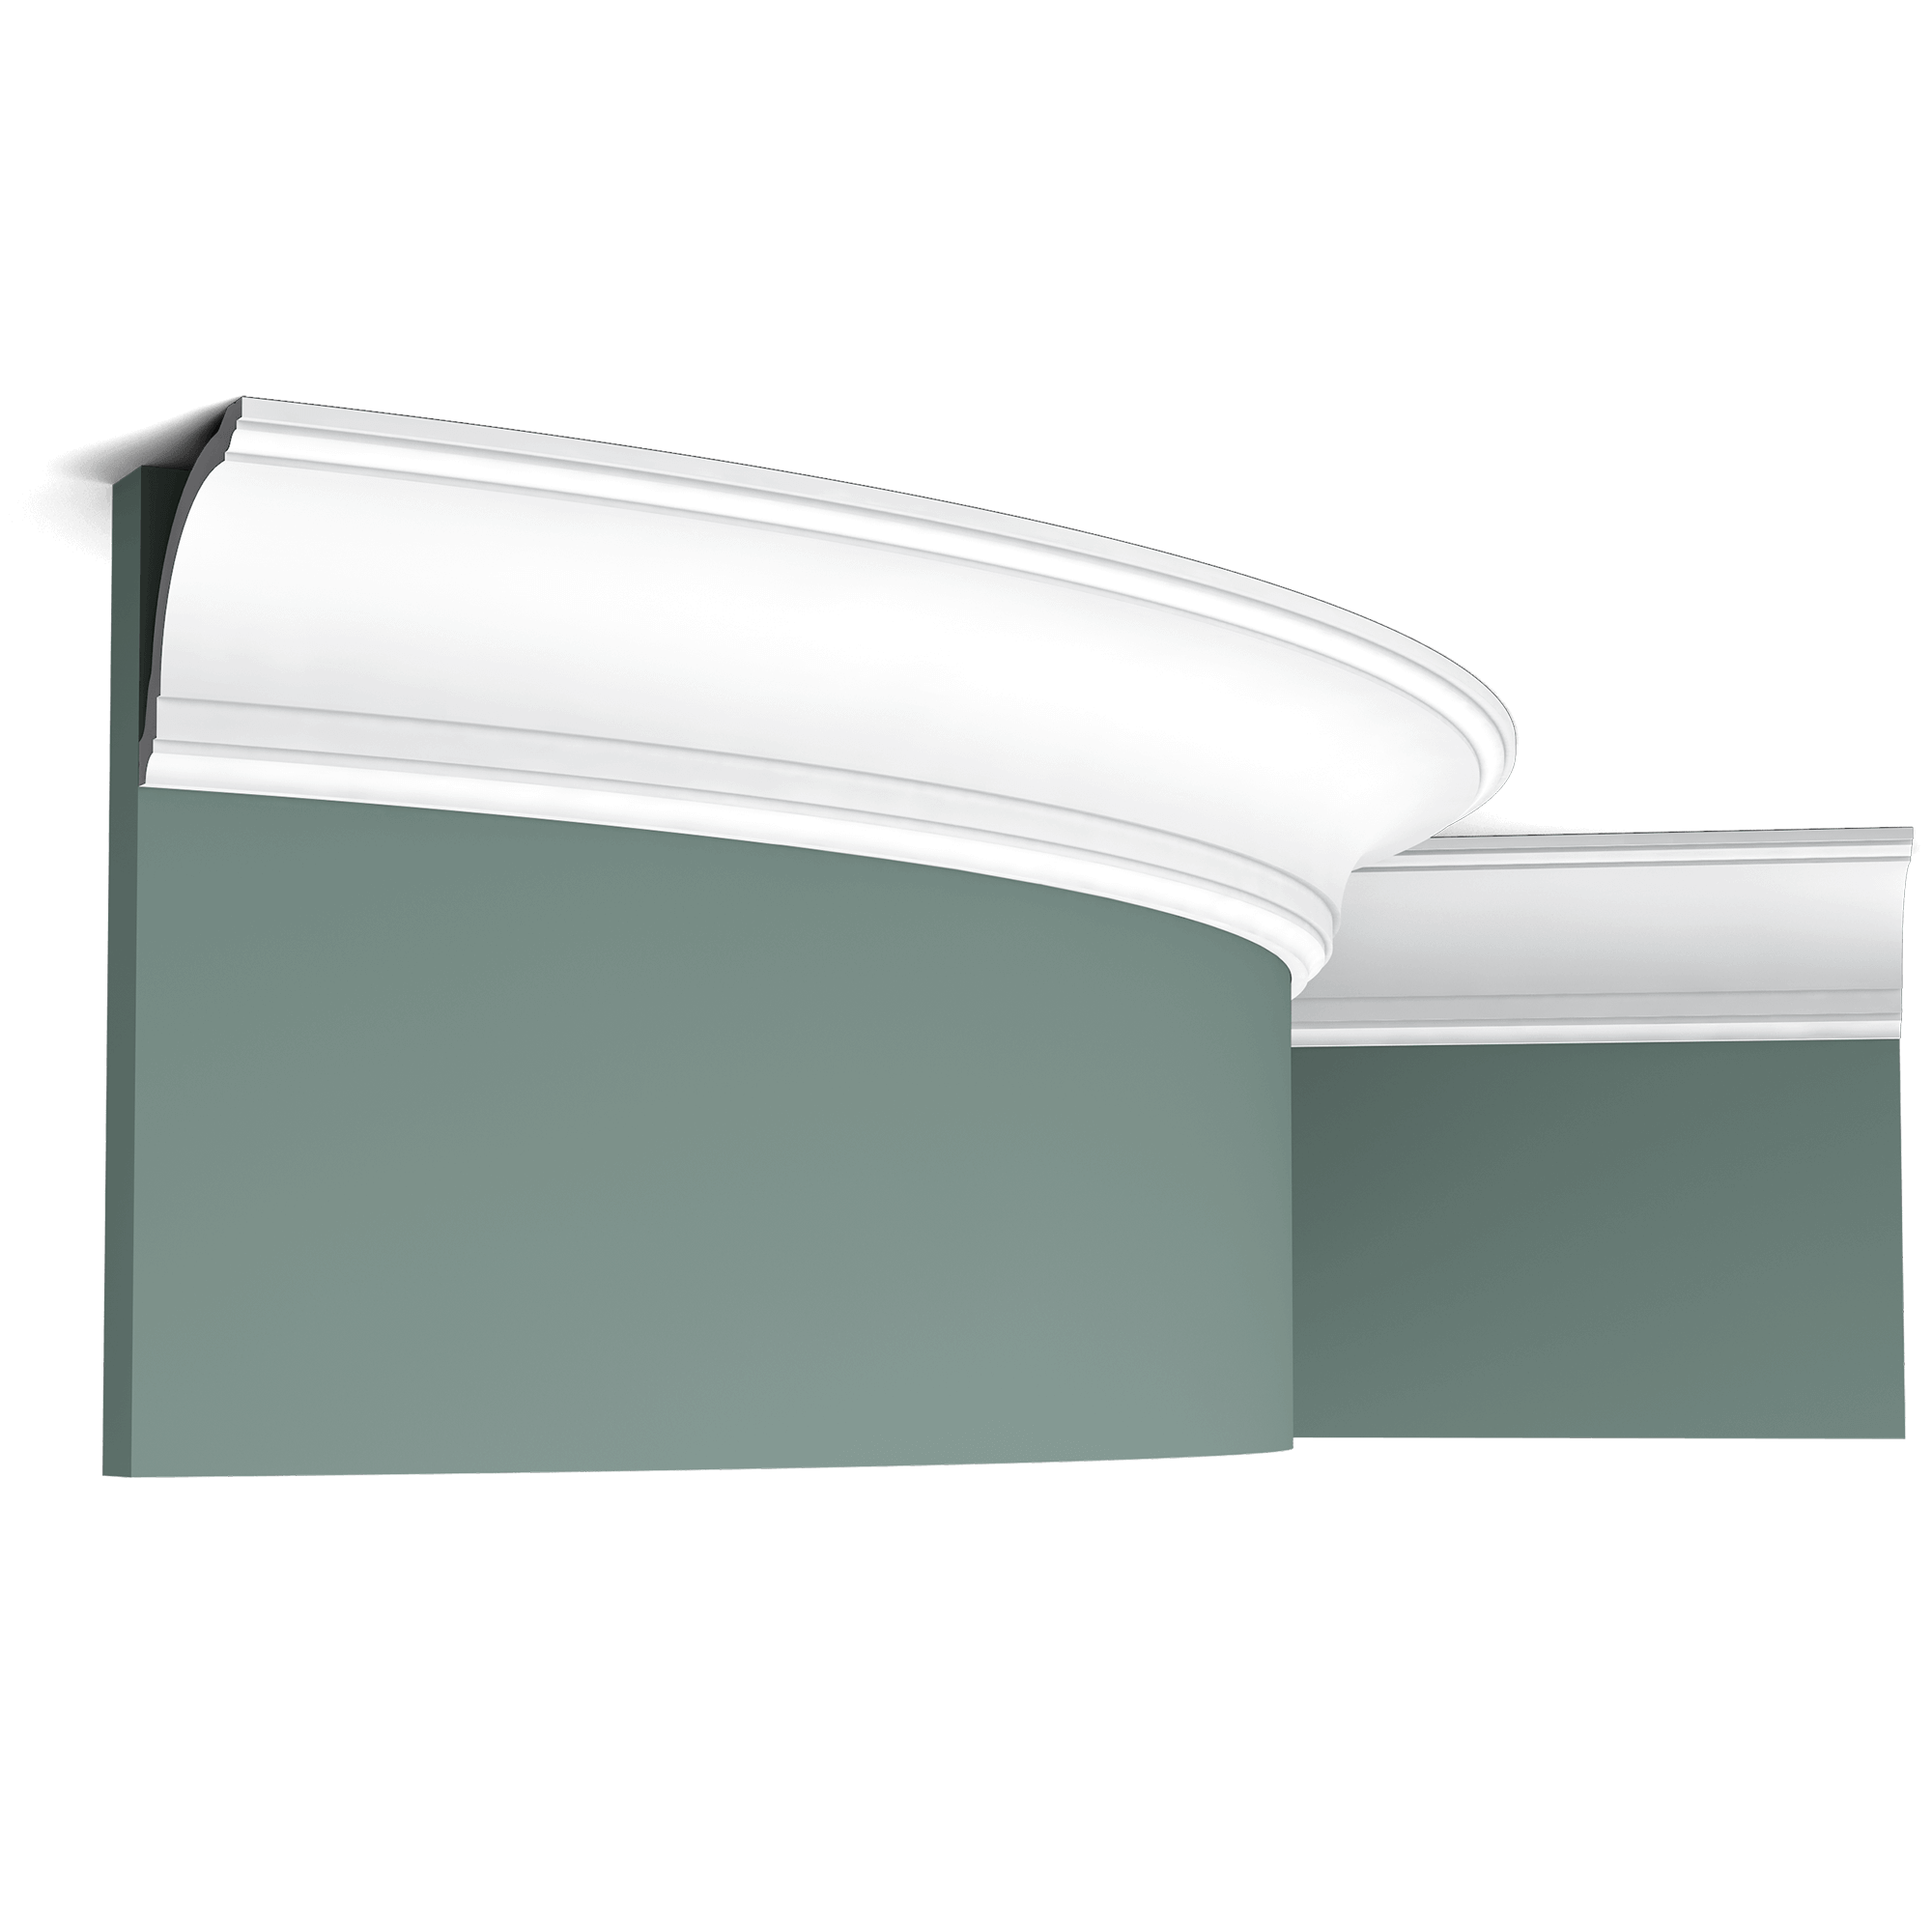 Flexible version of CX199. This elegant cornice moulding creates a subtle transition from wall to ceiling. This bestseller fits a variety of interiors. Flex Radius: R min = 200 cm